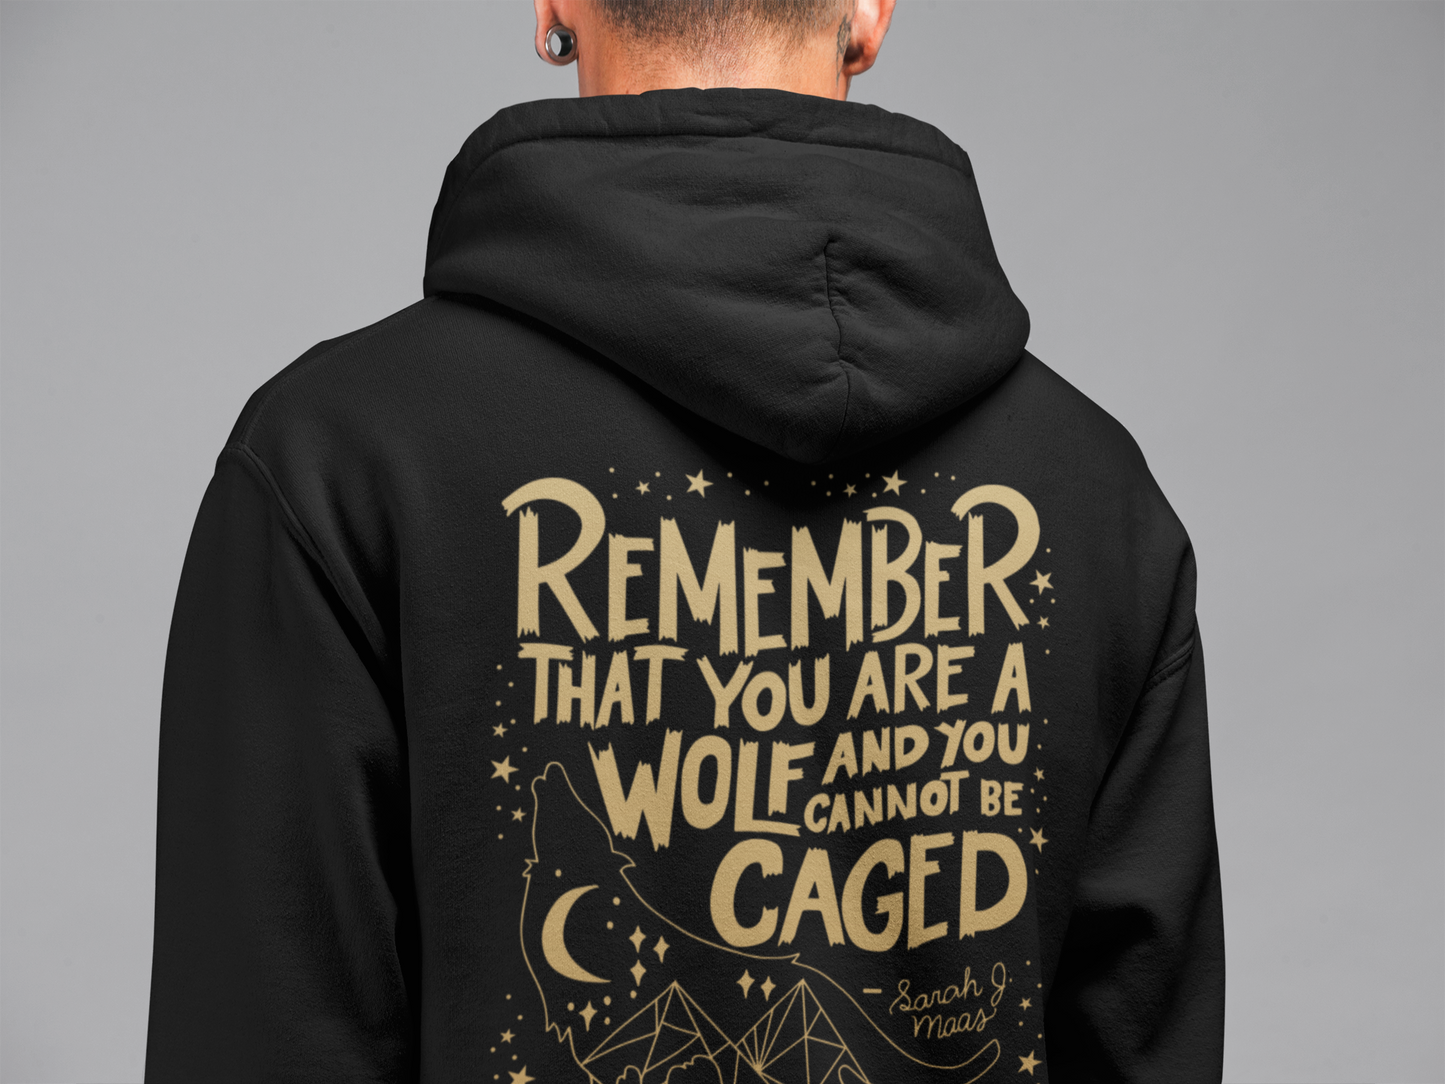 Remember You Are a Wolf and You Cannot Be Caged Hoodie/Zip Hoodie - Officially Licensed ACOTAR by Sarah J. Maas Merchandise